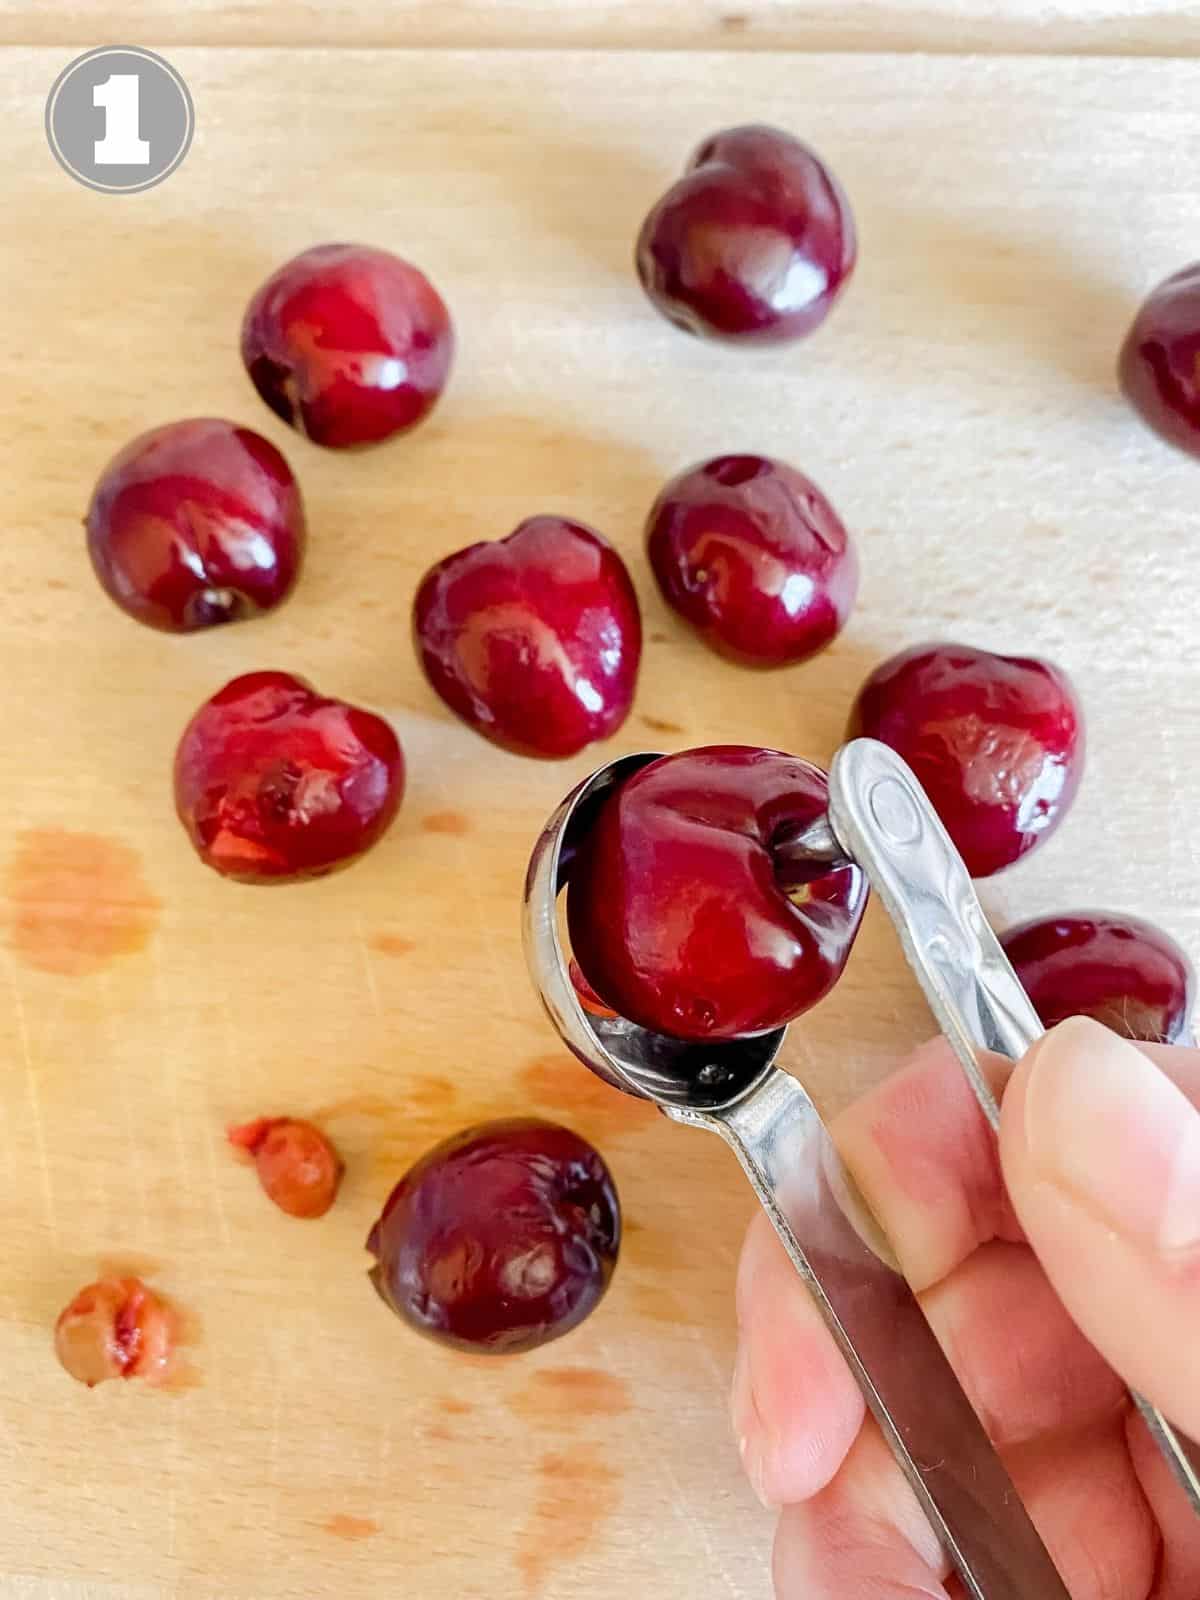 cherries being pitted on a wooden chopping board.